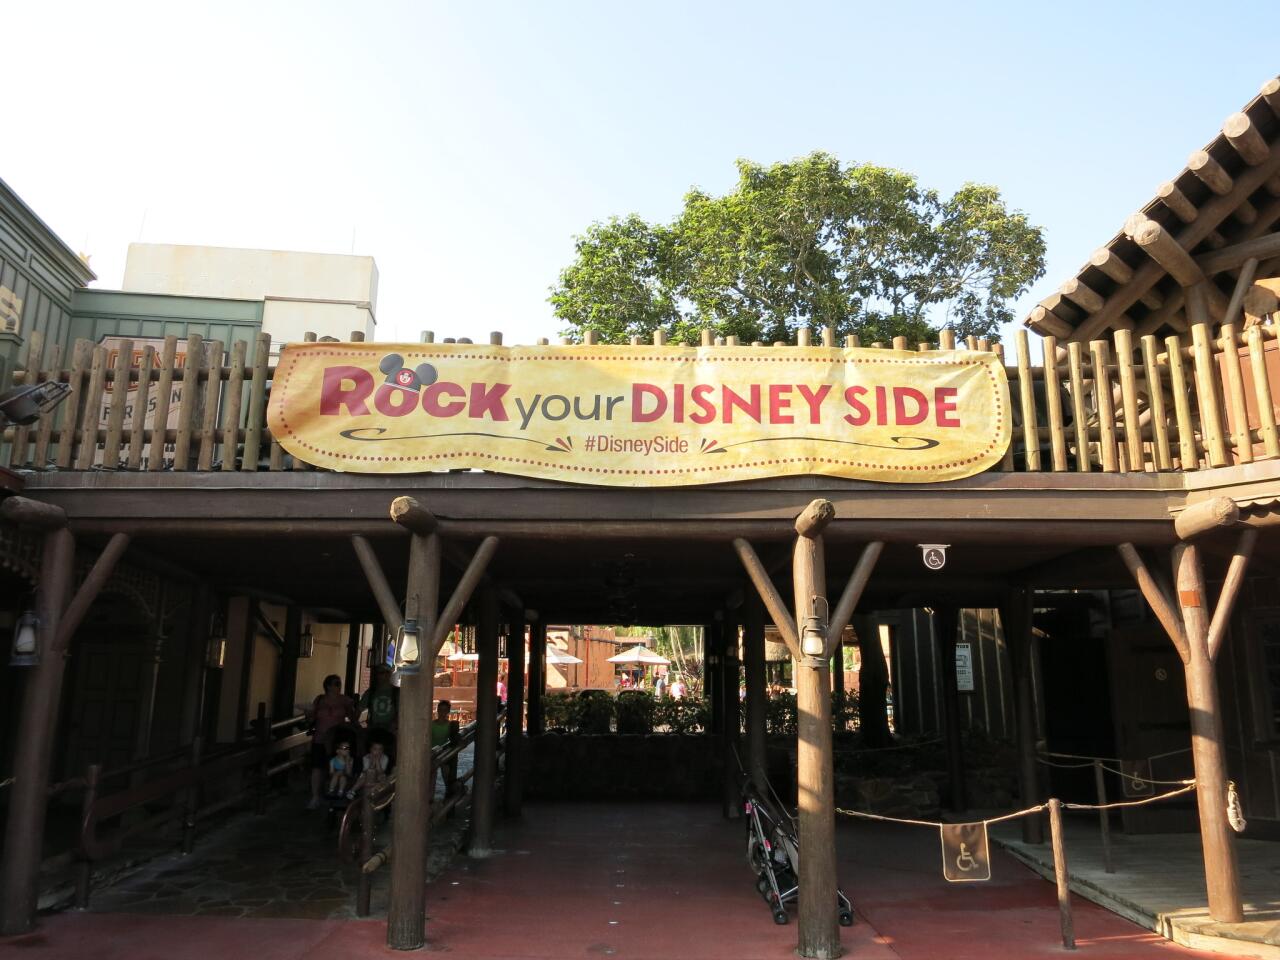 Rock Your Disney Side 24-hour event